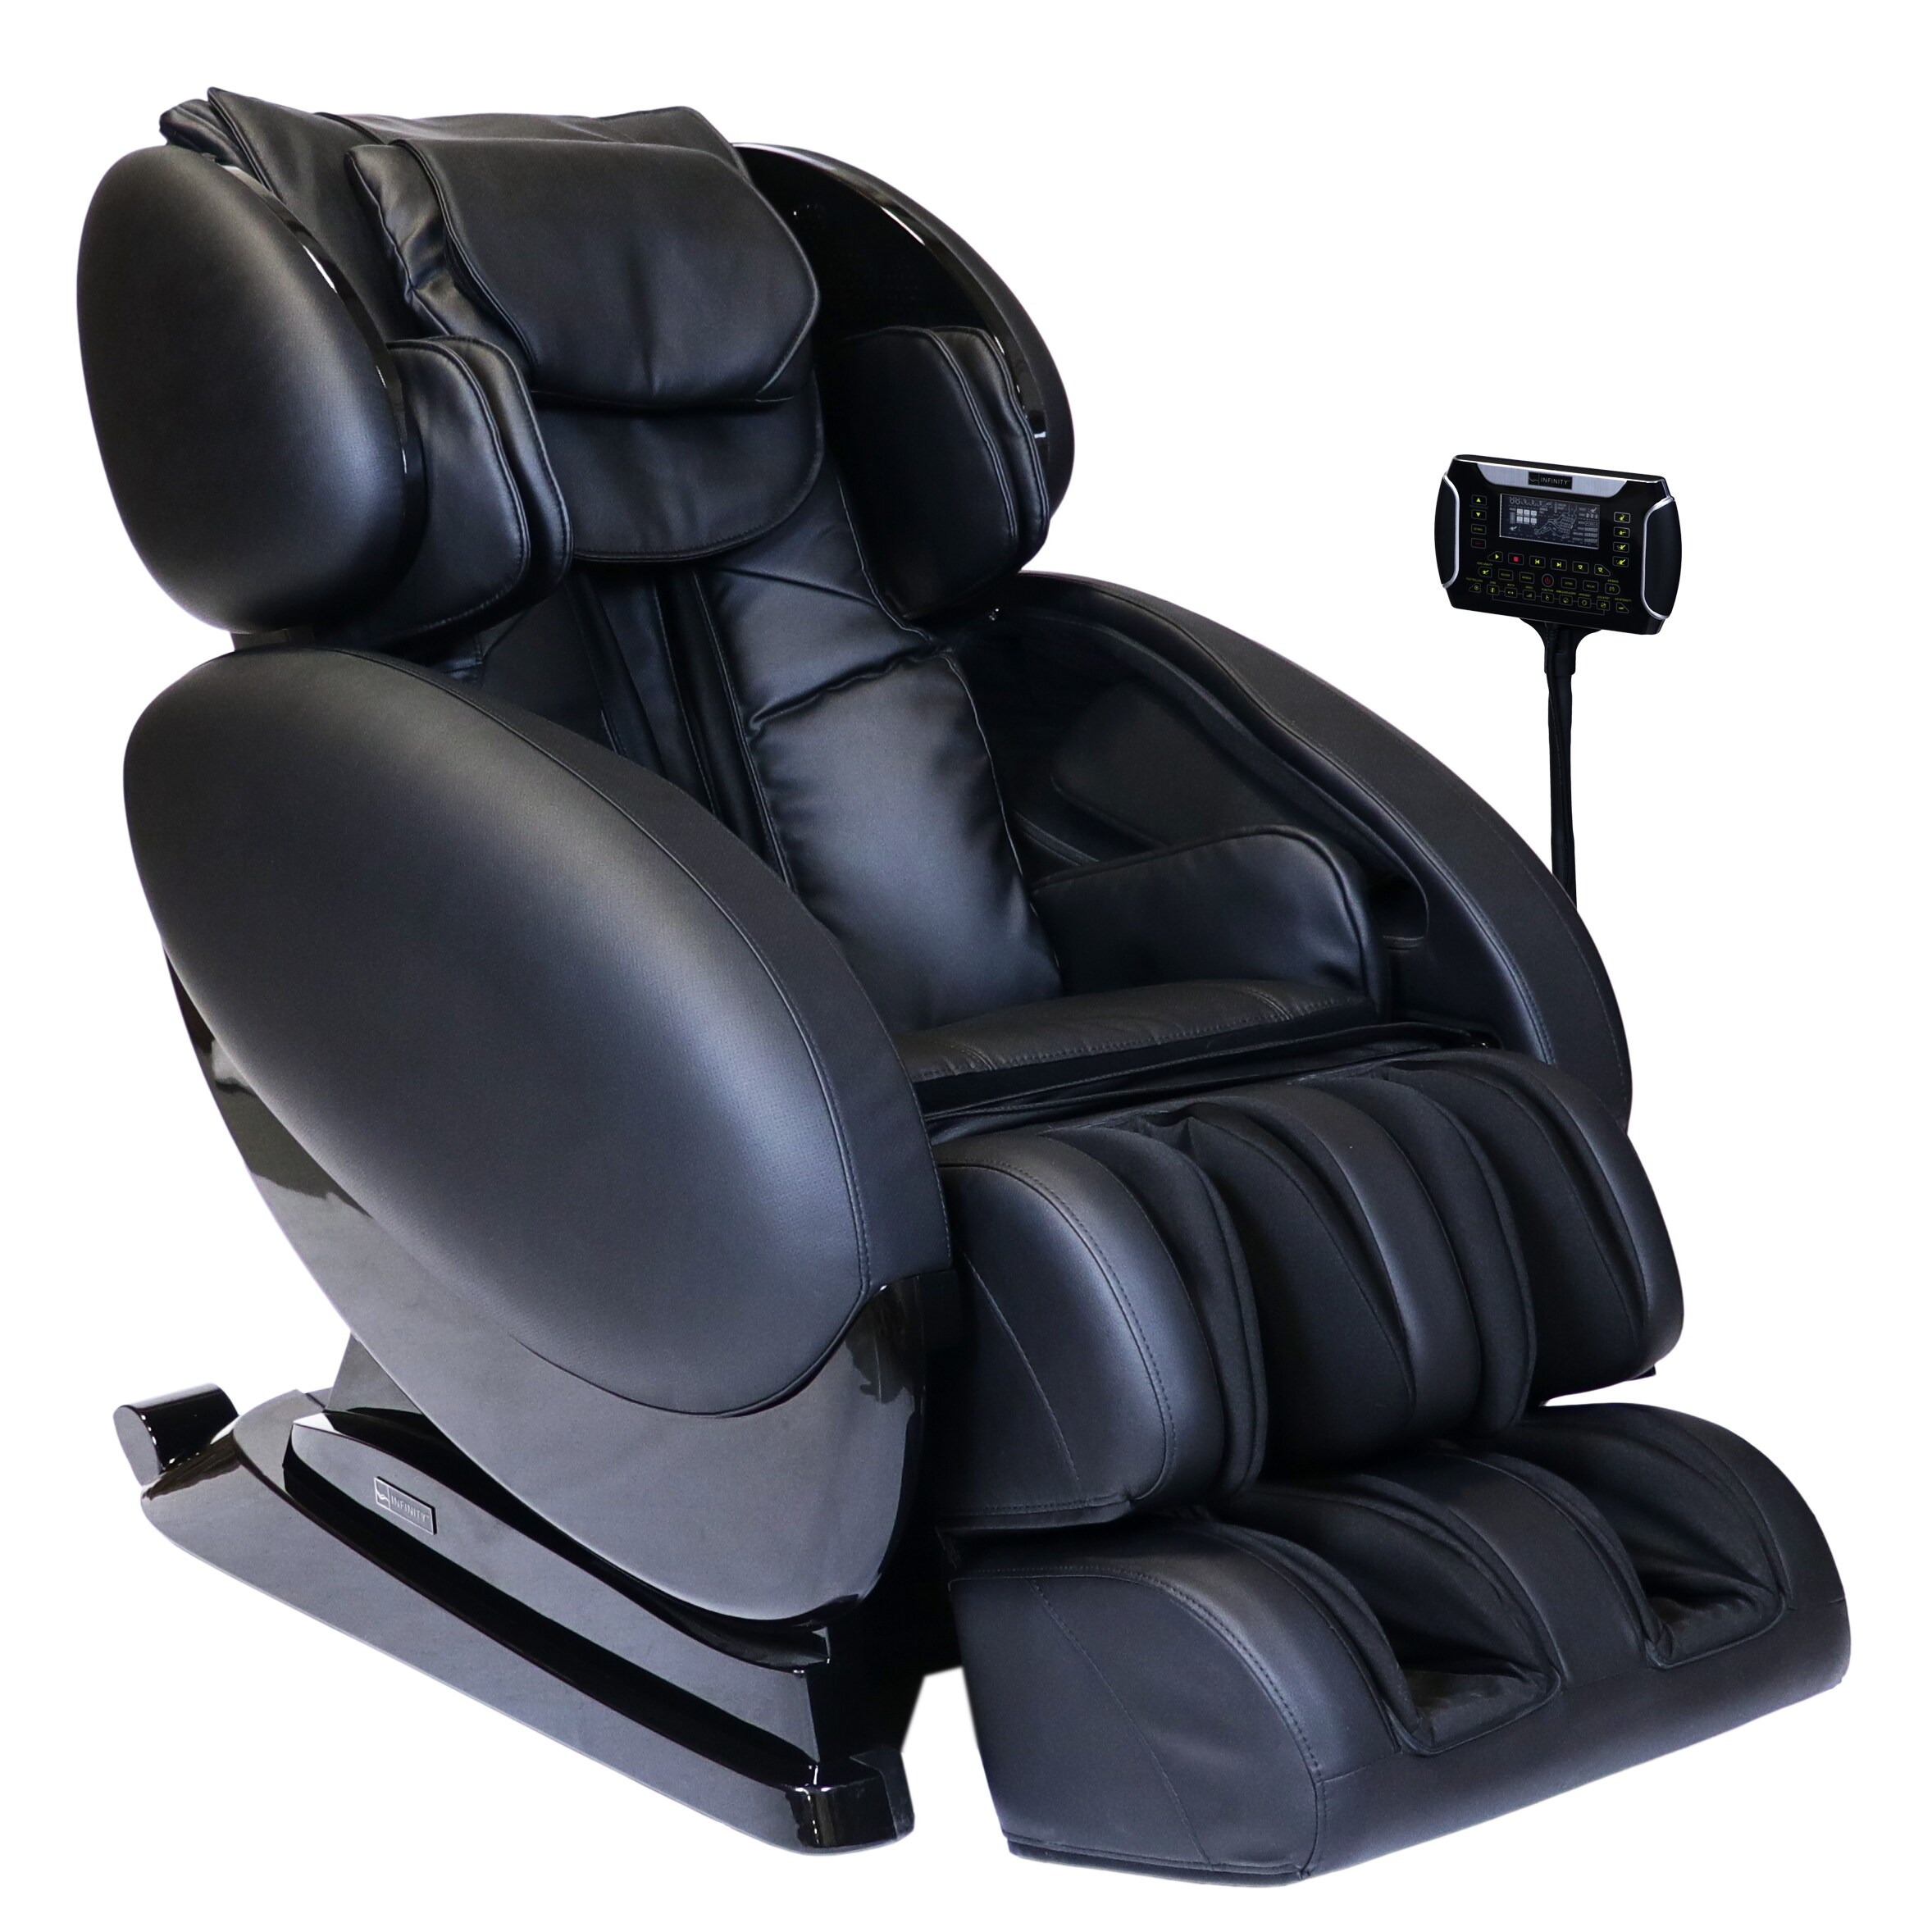 Shop Infinity IT-8500 Full Body Massage Chair, with Decompression